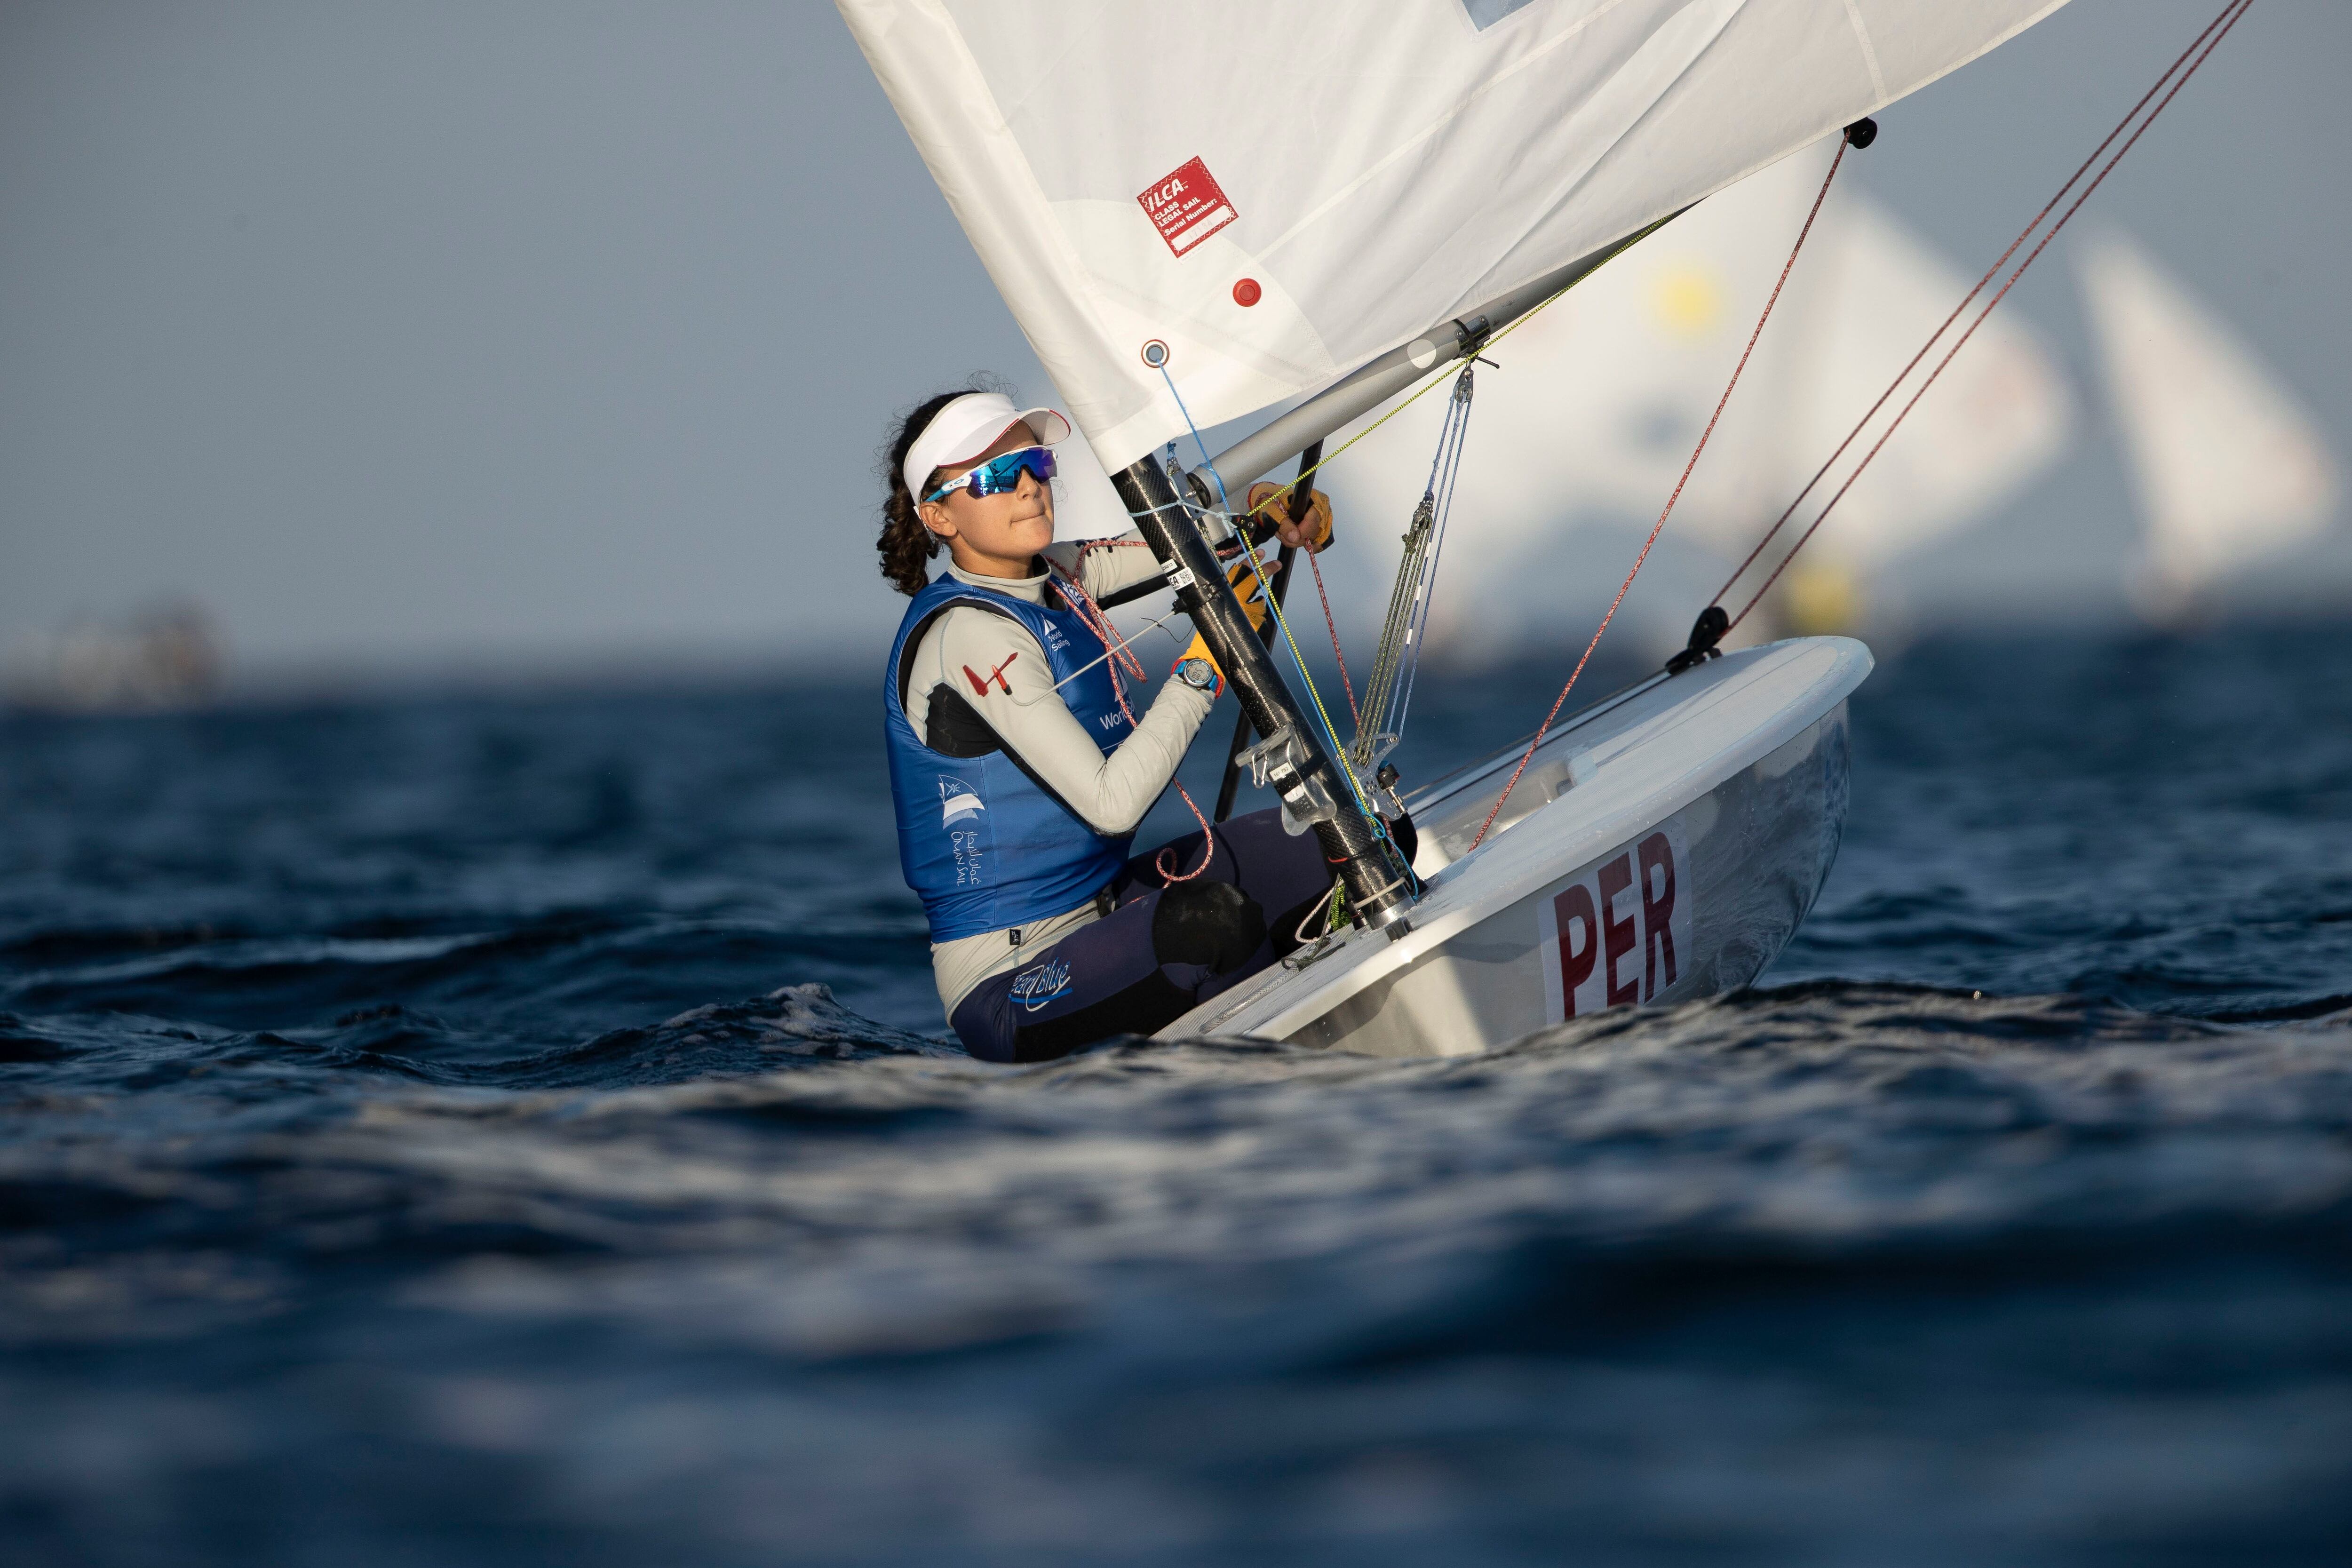 MUSCAT, OMAN - DECEMBER 15: Florencia Chiarella from Peru on day 3 of racing in the ILCA 6 Laser dingy fleet at The 2021 Youth Sailing World Championships presented by Hempel, Al Mussanah, on December 15, 2021 in Muscat, Oman. (Photo by Lloyd Images/Getty Images)